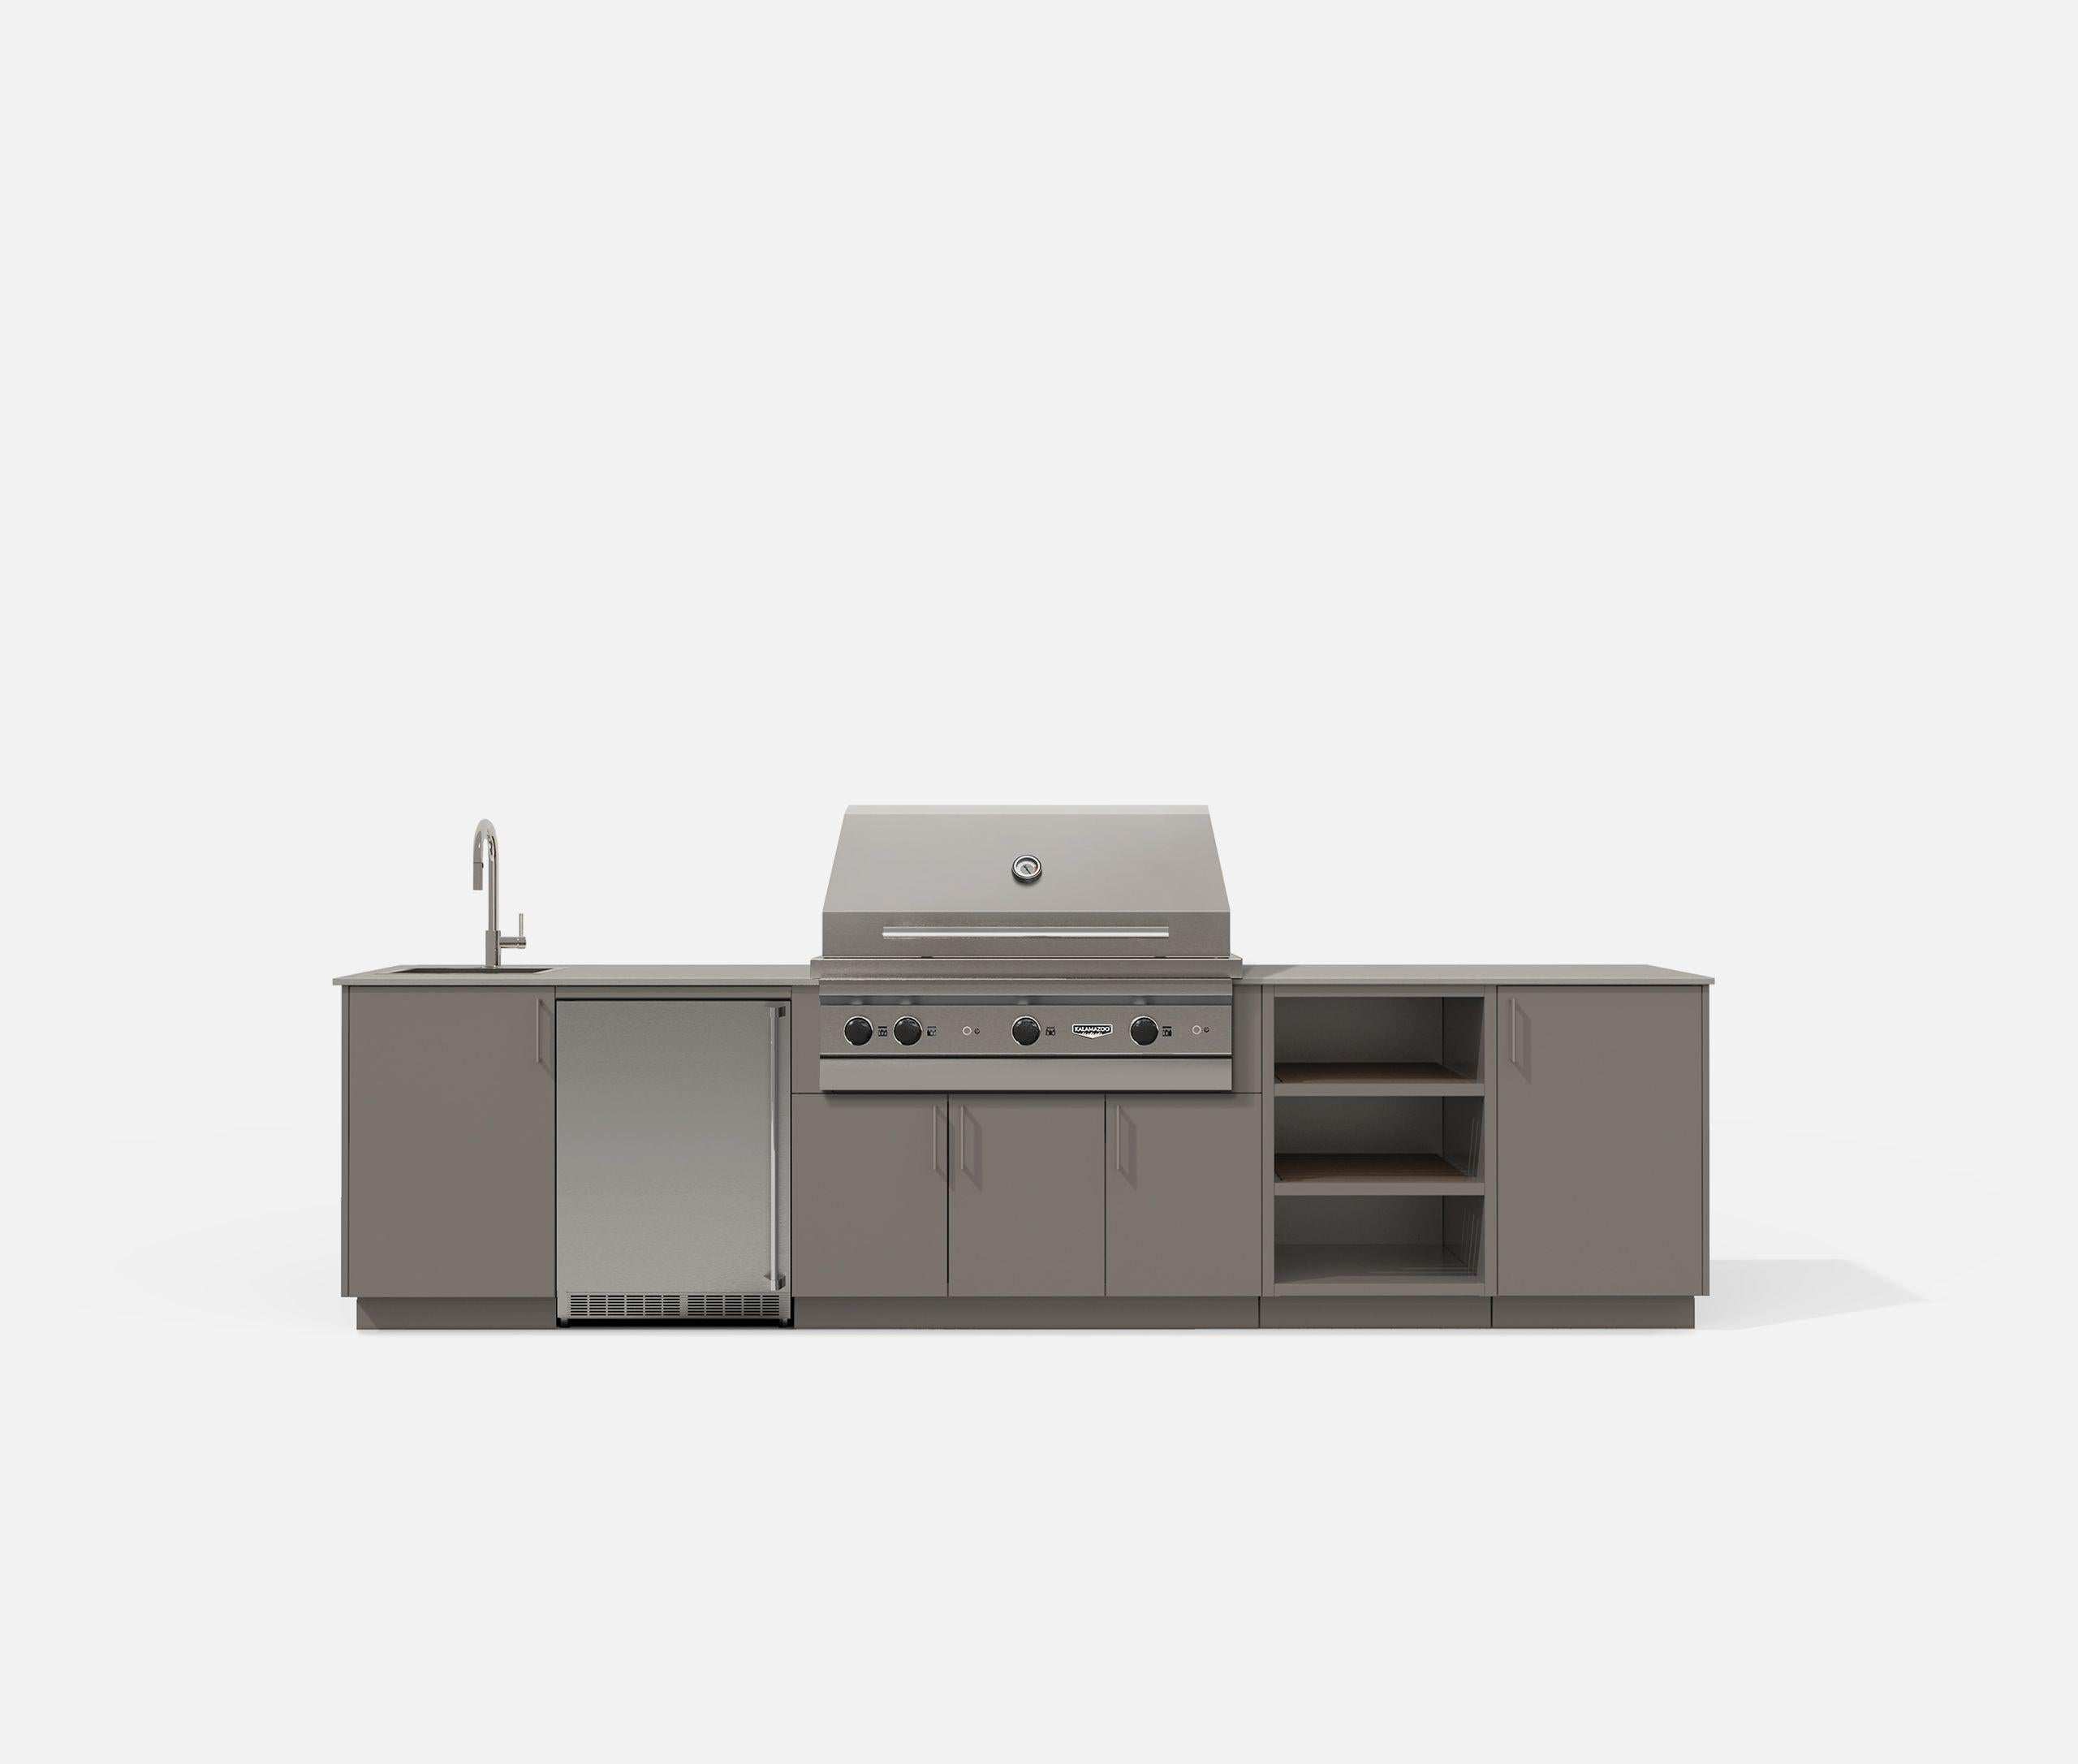 Urban Bonfire CTAHOE42CLAY Tahoe 42 Outdoor Kitchen (Clay)GRILL SOLD SEPARATELY